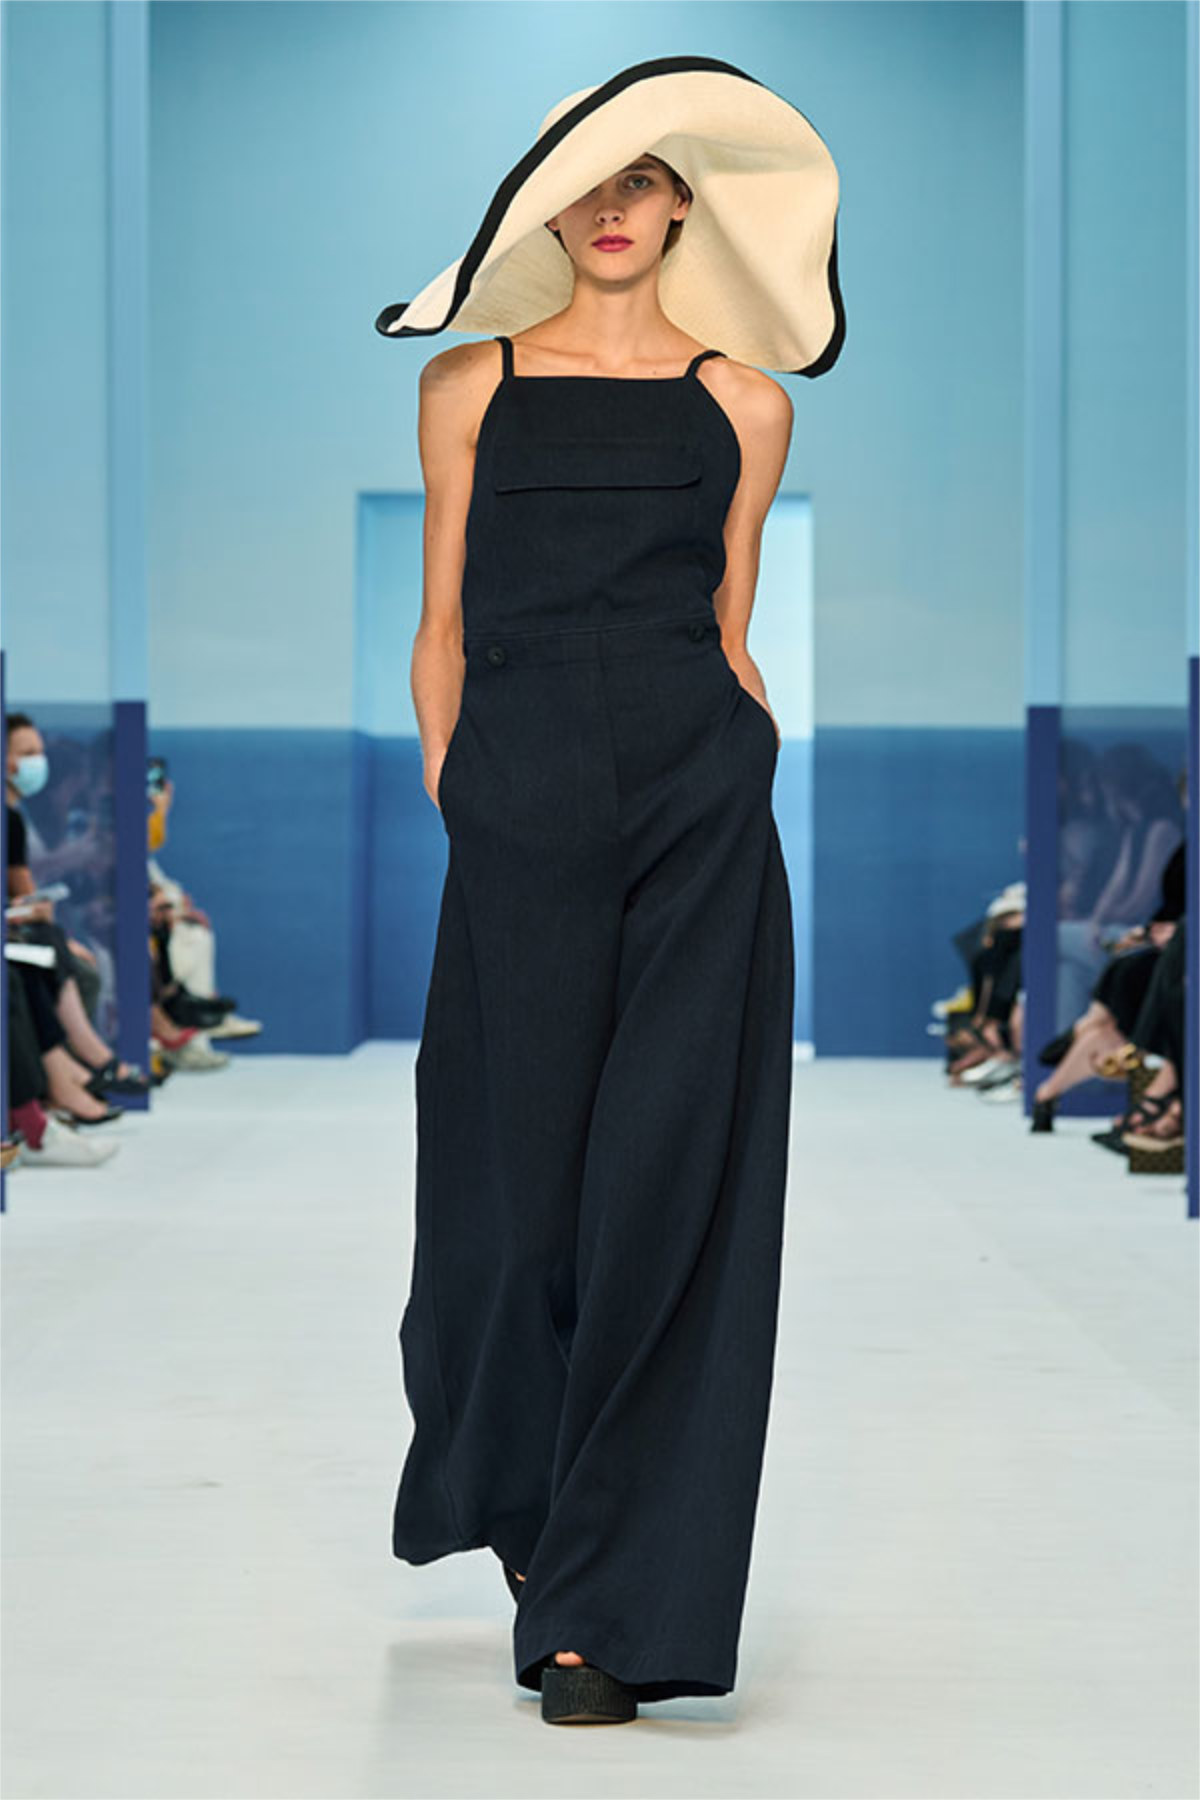 Max Mara Presents Its New Spring Summer 2023 Collection - The Blue Horizon